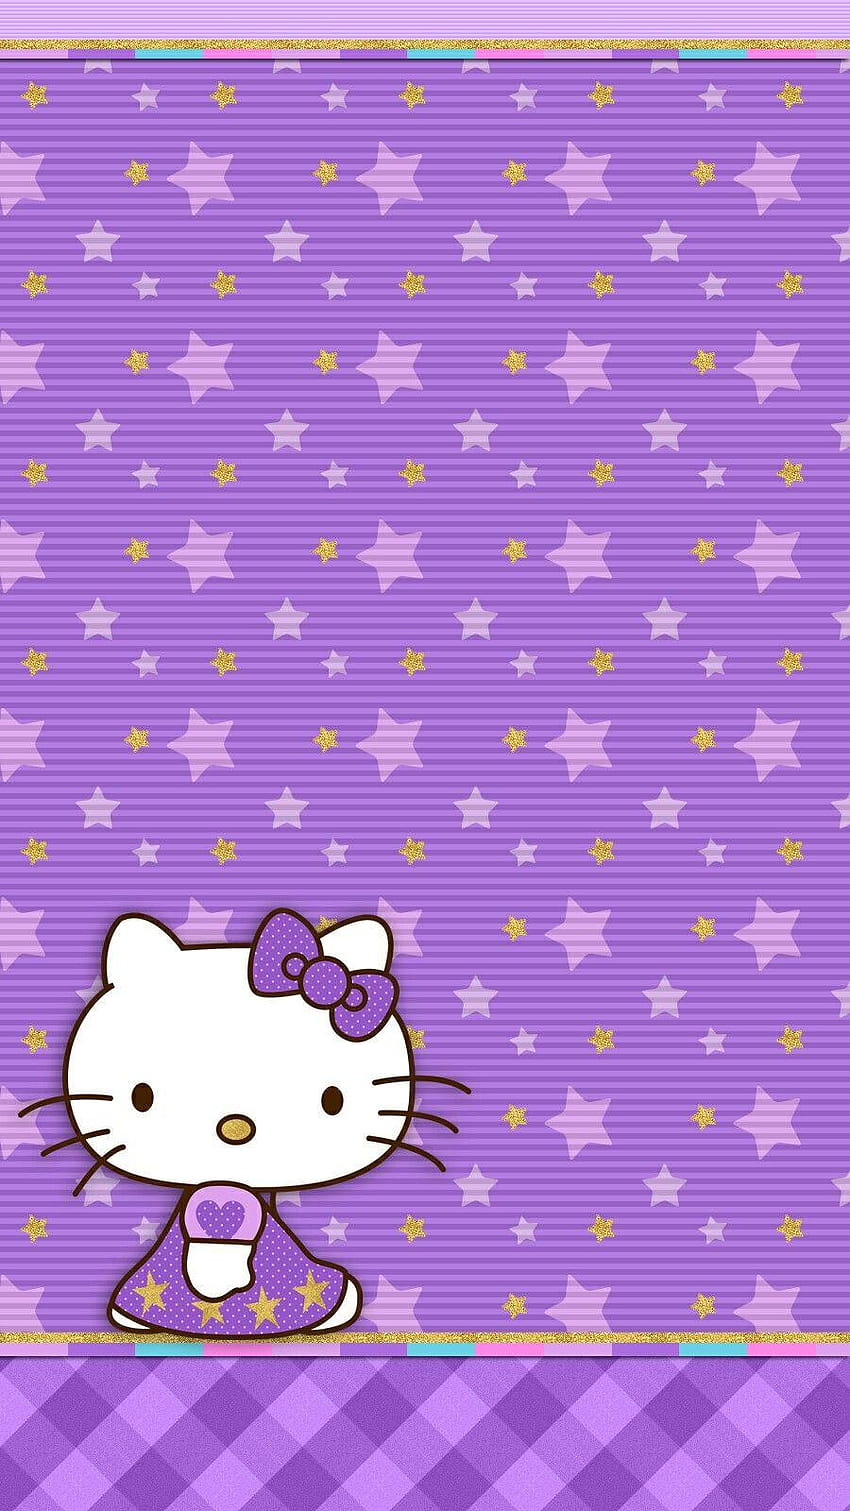 25 Hello Kitty Wallpapers To Add A Delight Touch To Your Devices  Hello  Kitty On The Phone  Idea Wallpapers  iPhone WallpapersColor Schemes